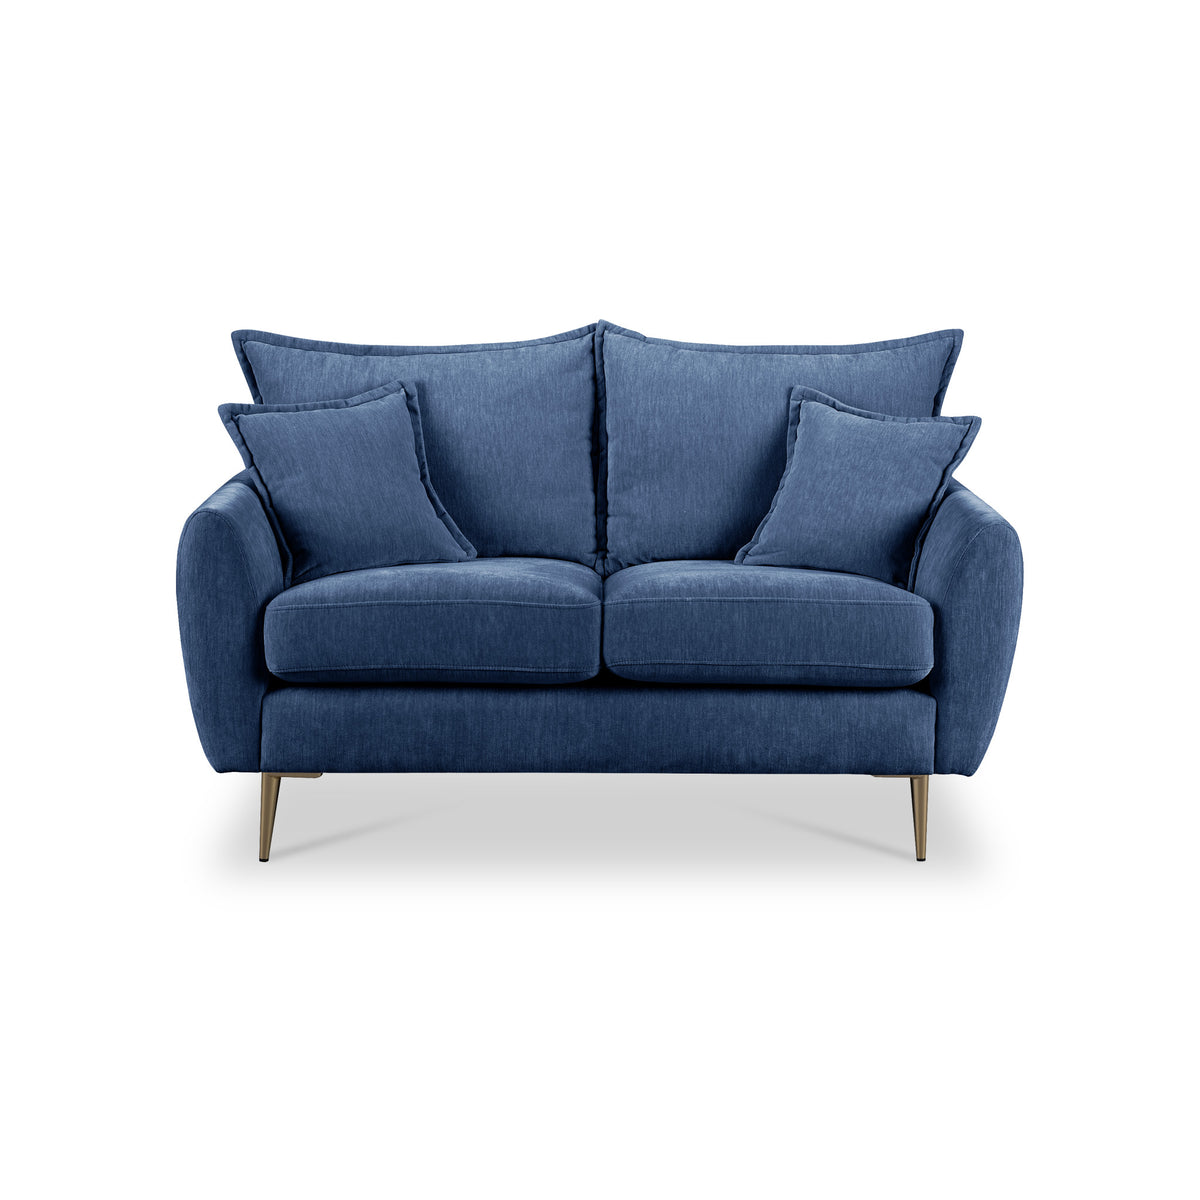 Evelyn Navy Blue 2 Seater Sofa from Roseland Furniture